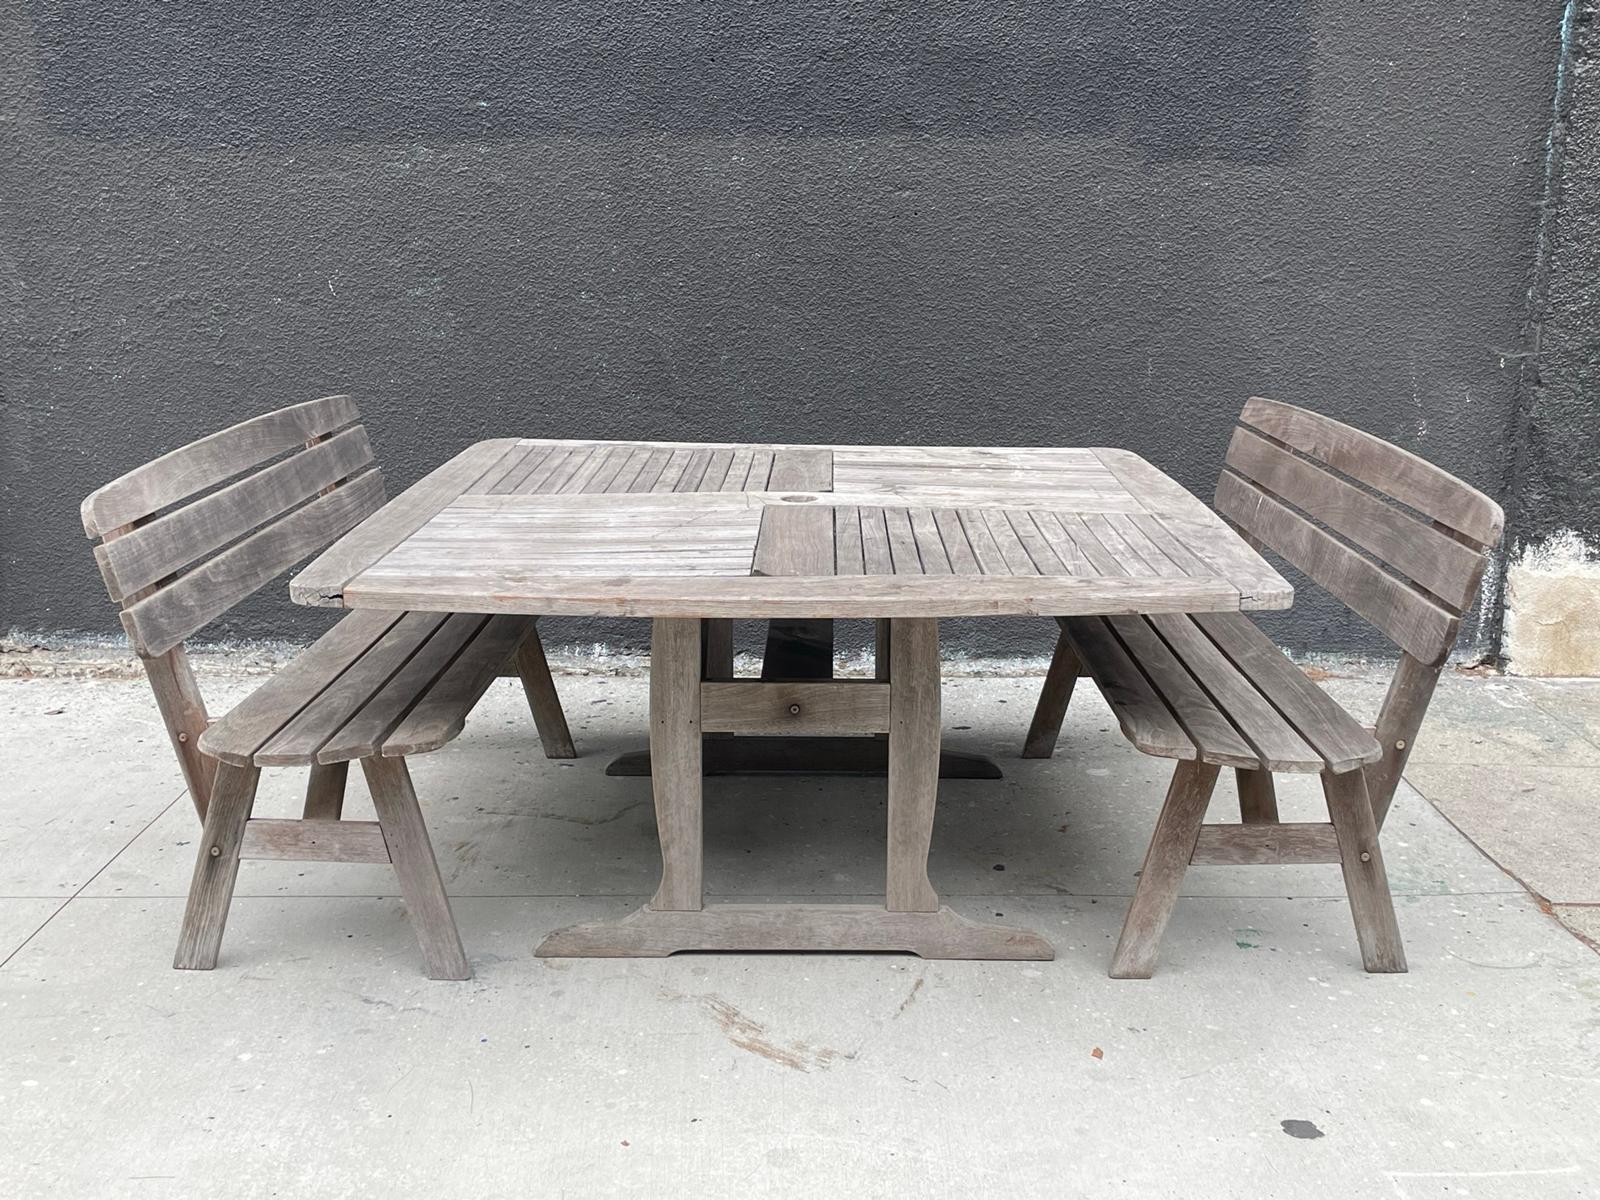 Introducing the Patio Table & Benches by Jensen-Jarrah, a stunning addition to any outdoor space. Proudly made in Australia from fine Australian Jarrah wood timber, this furniture set is crafted with the highest quality materials and impeccable